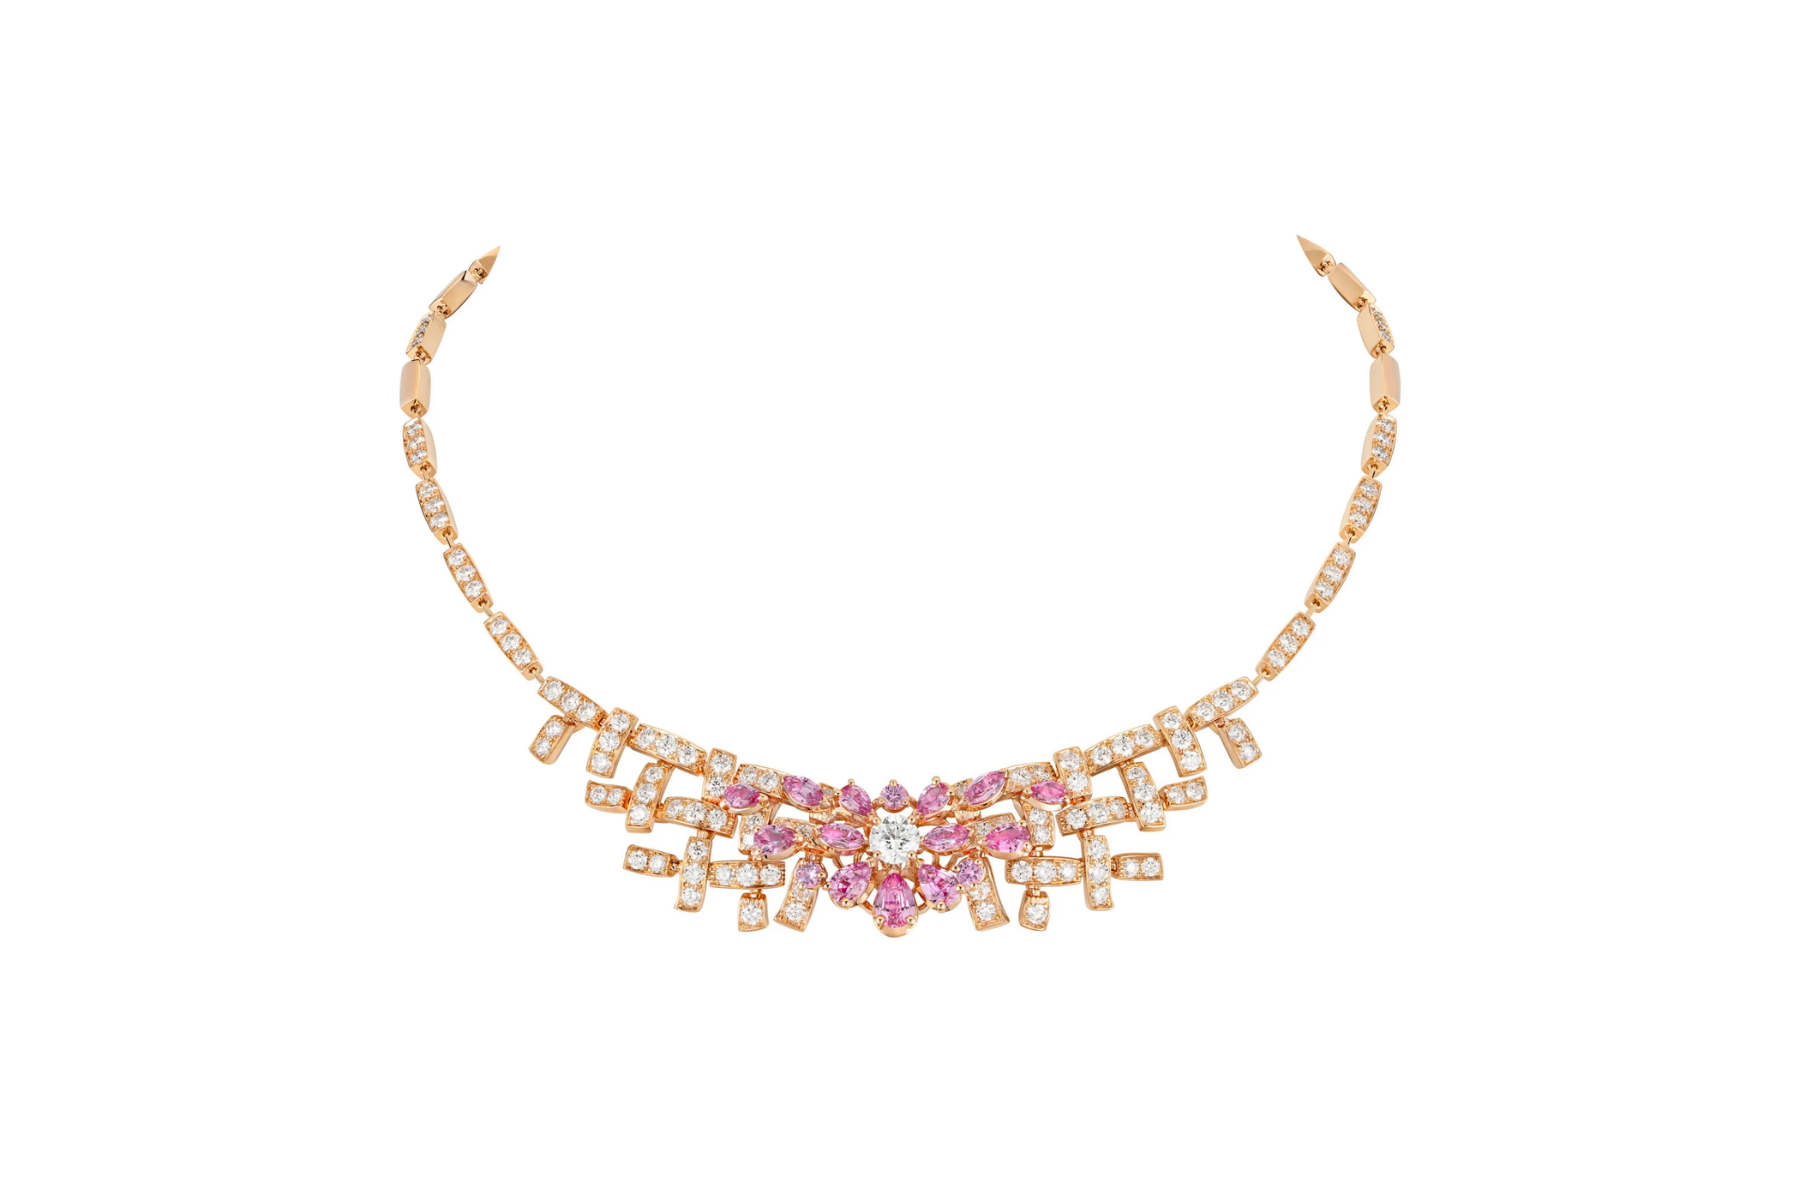 Chanel’s Tweed Poudré necklace